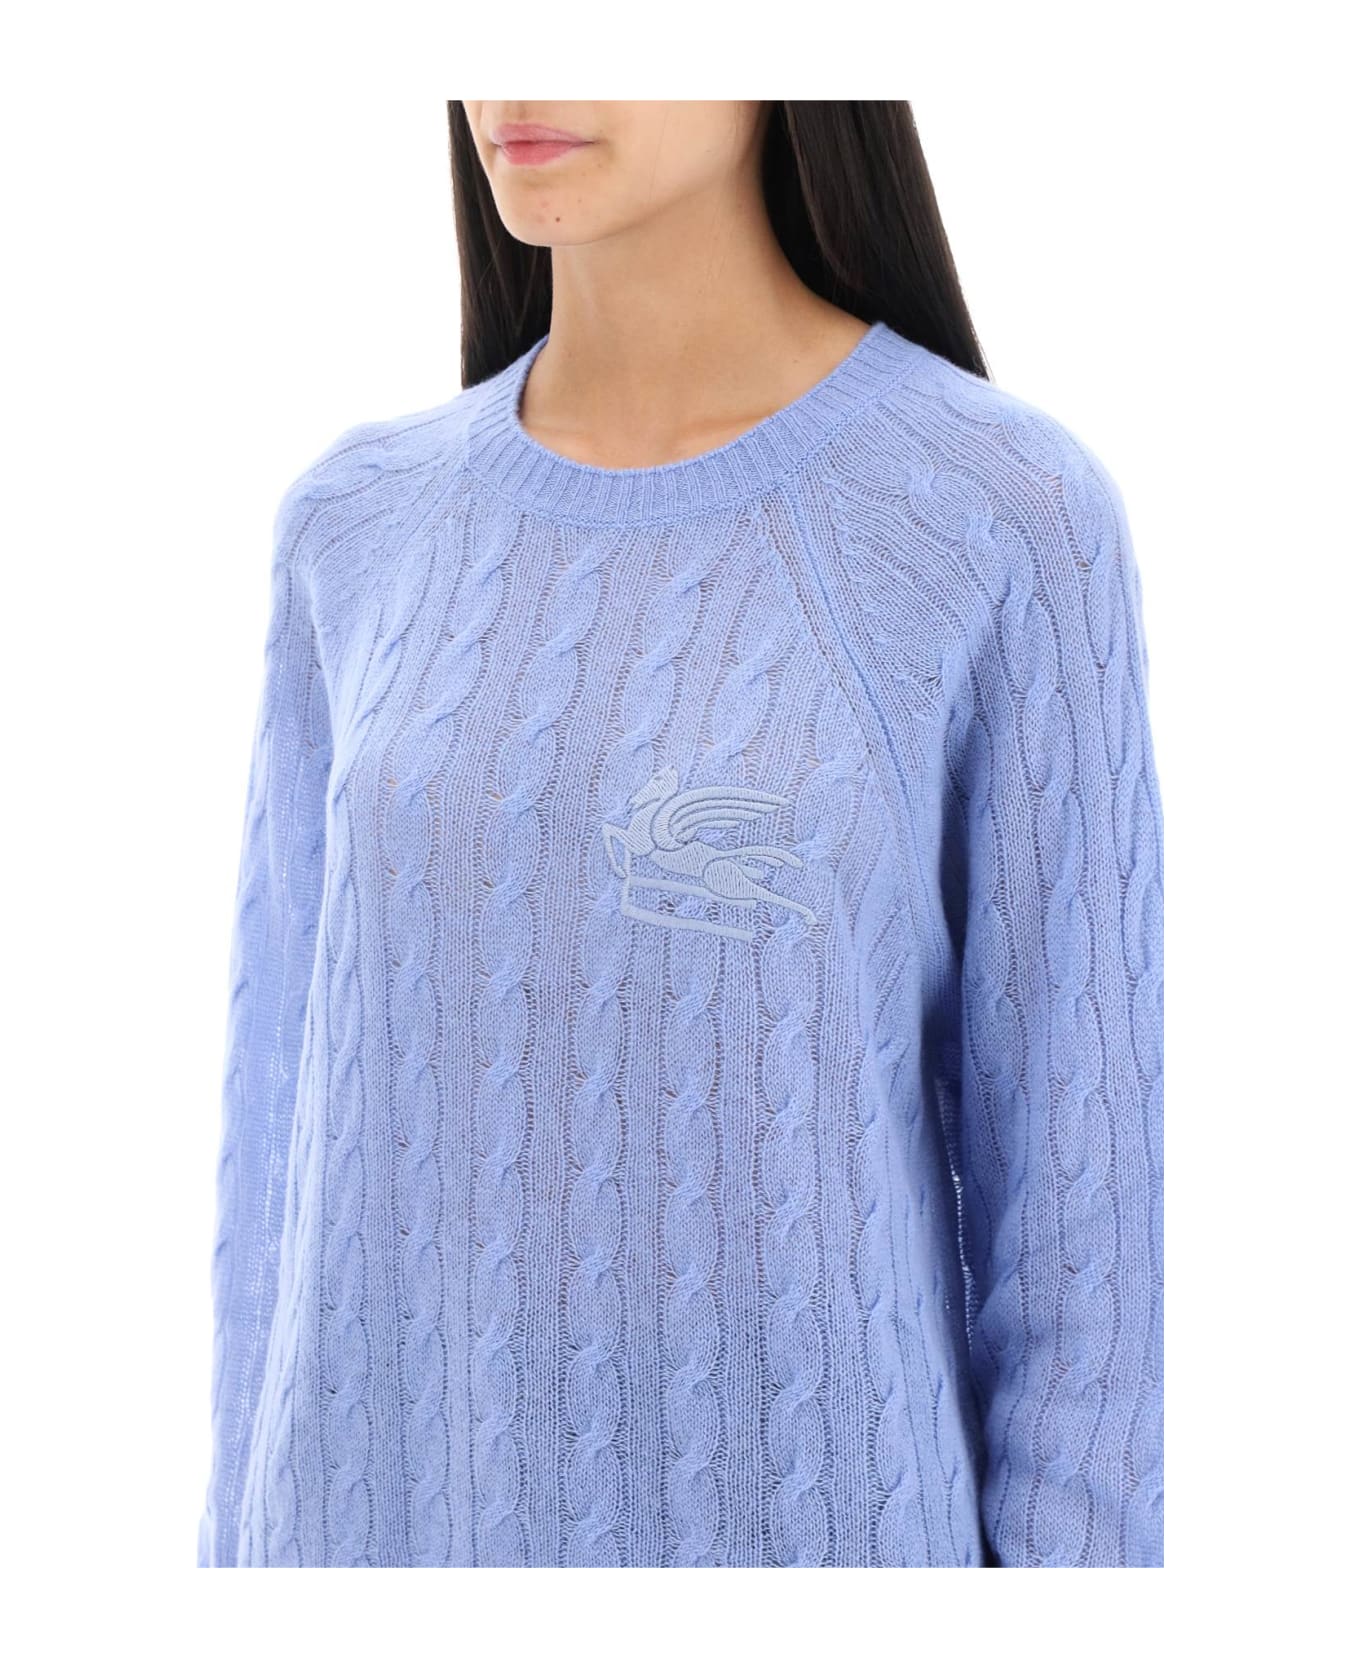 Etro Cashmere Sweater With Pegasus Embroidery - LIGHT BLUE (Light blue)